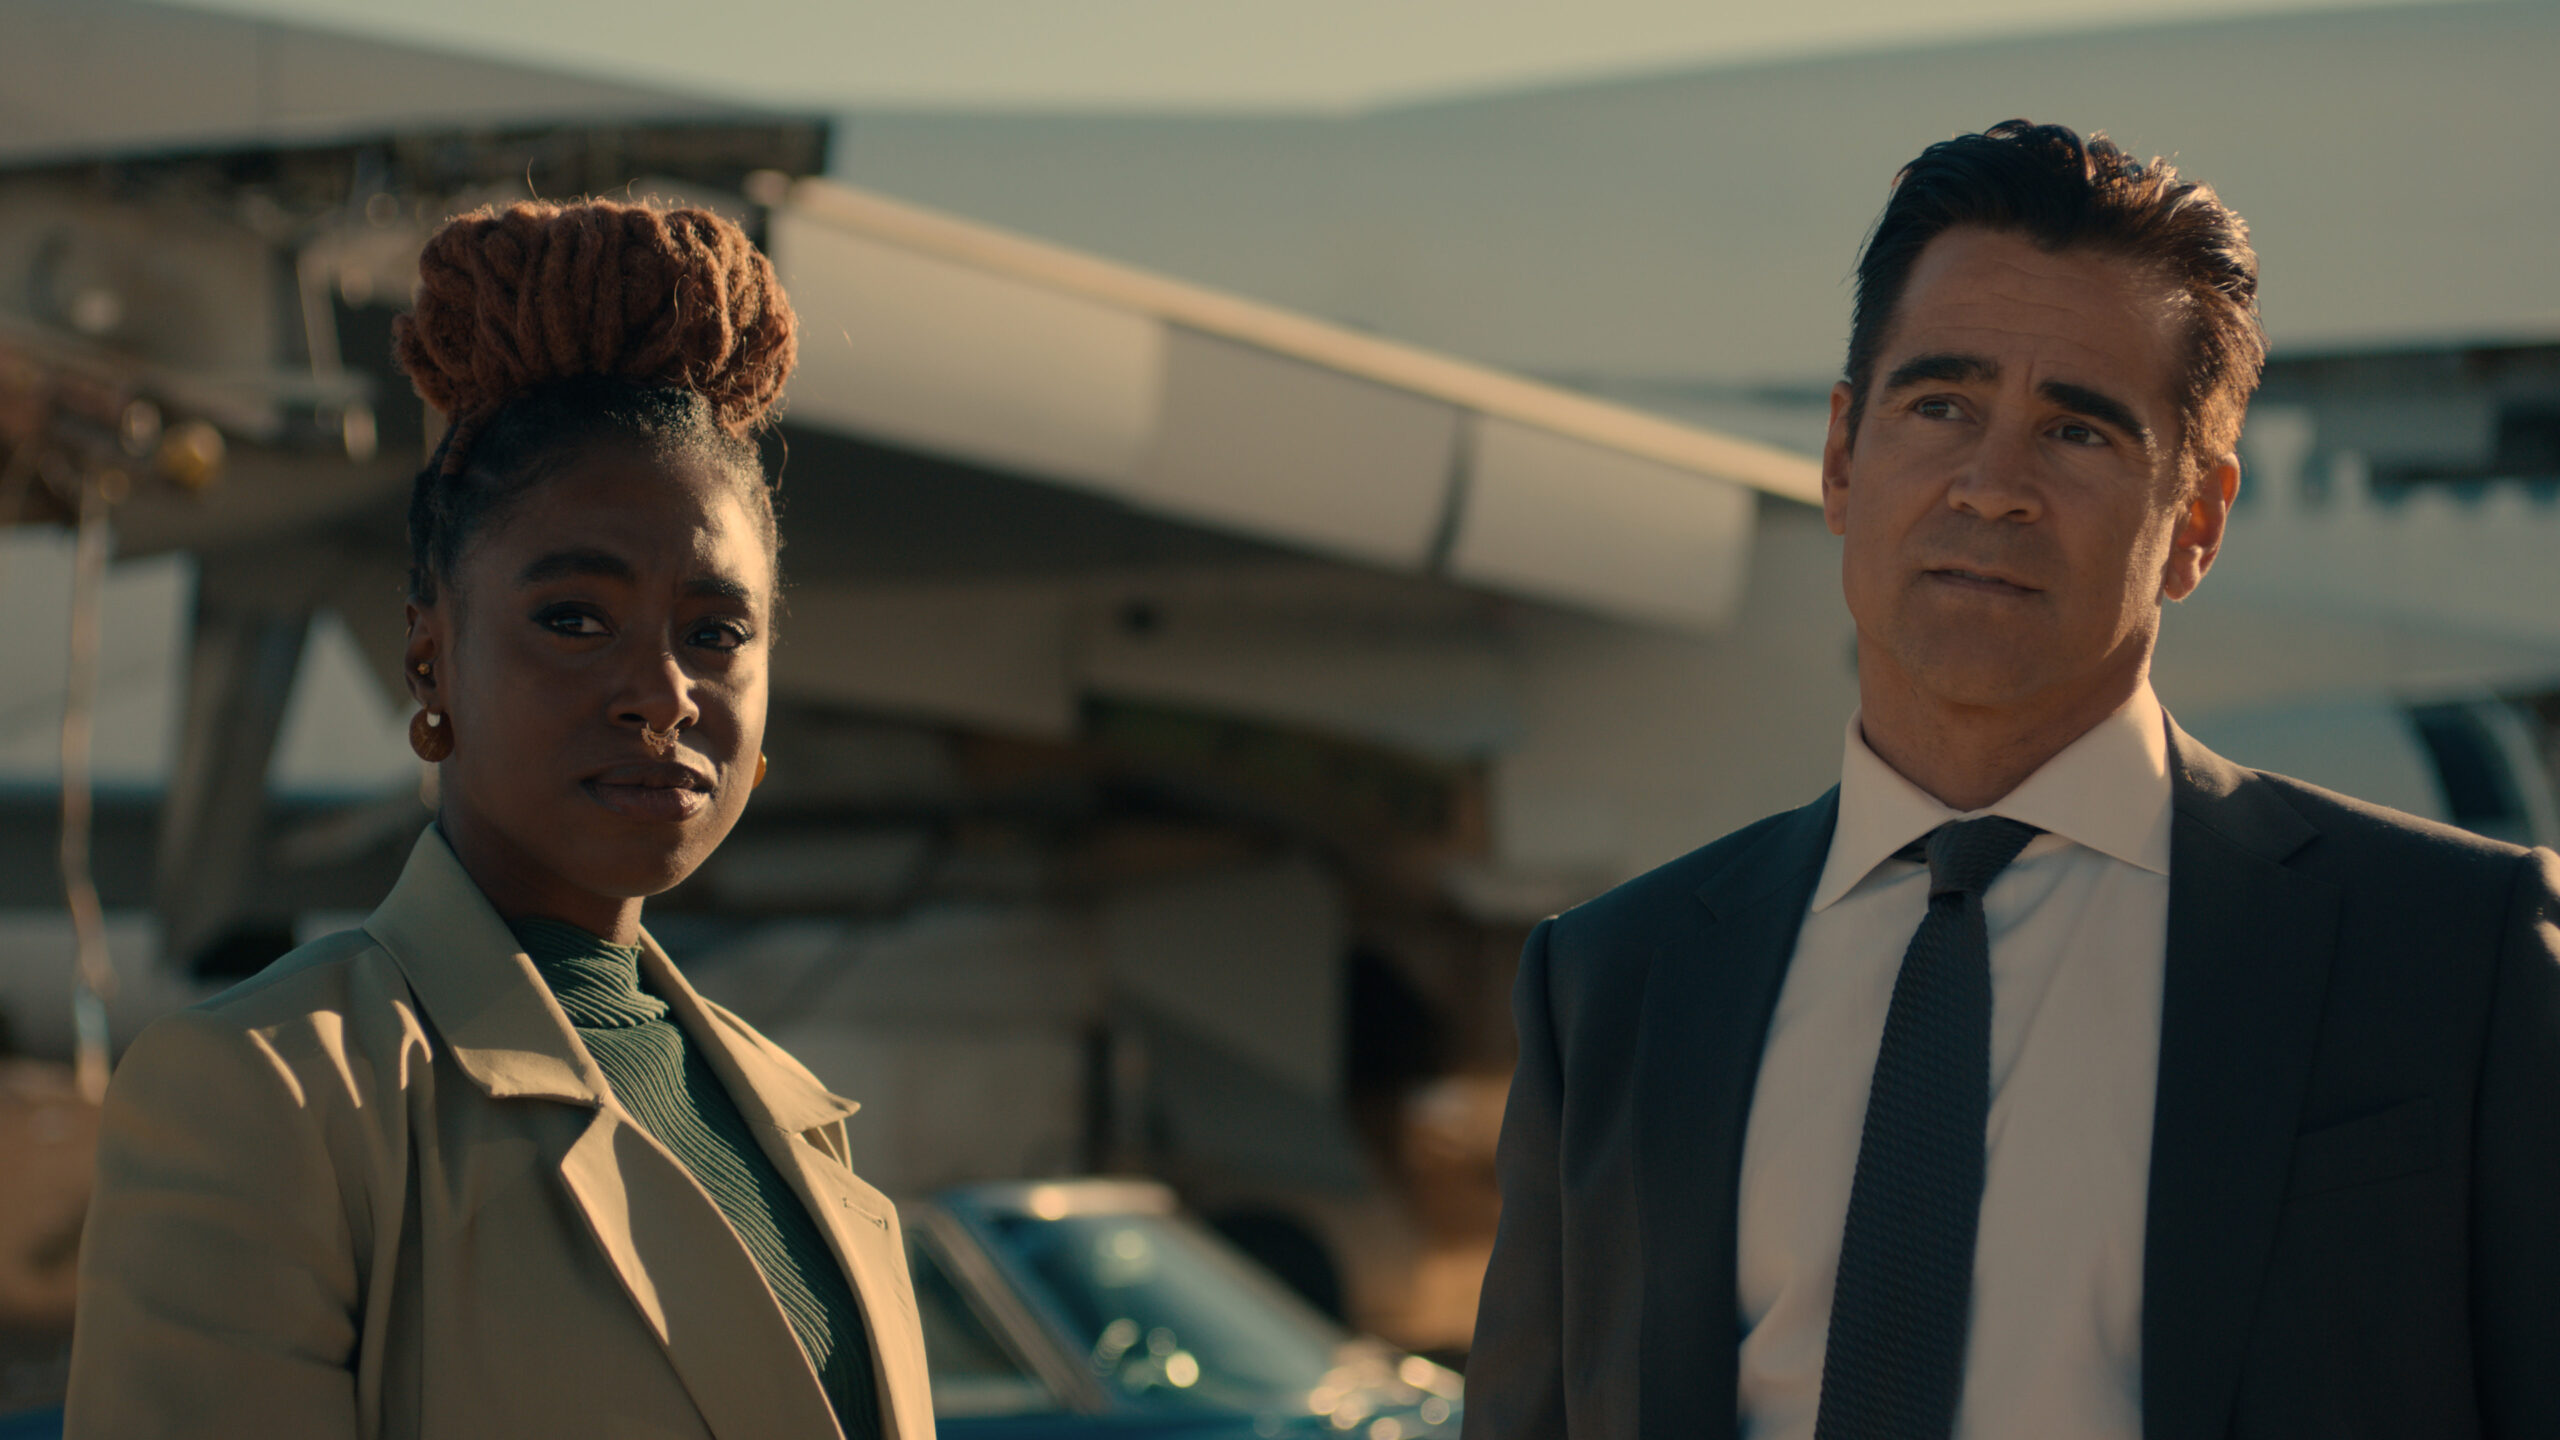 'Sugar' Trailer: Colin Farrell, Kirby And More In Apple TV+'s New Detective Series